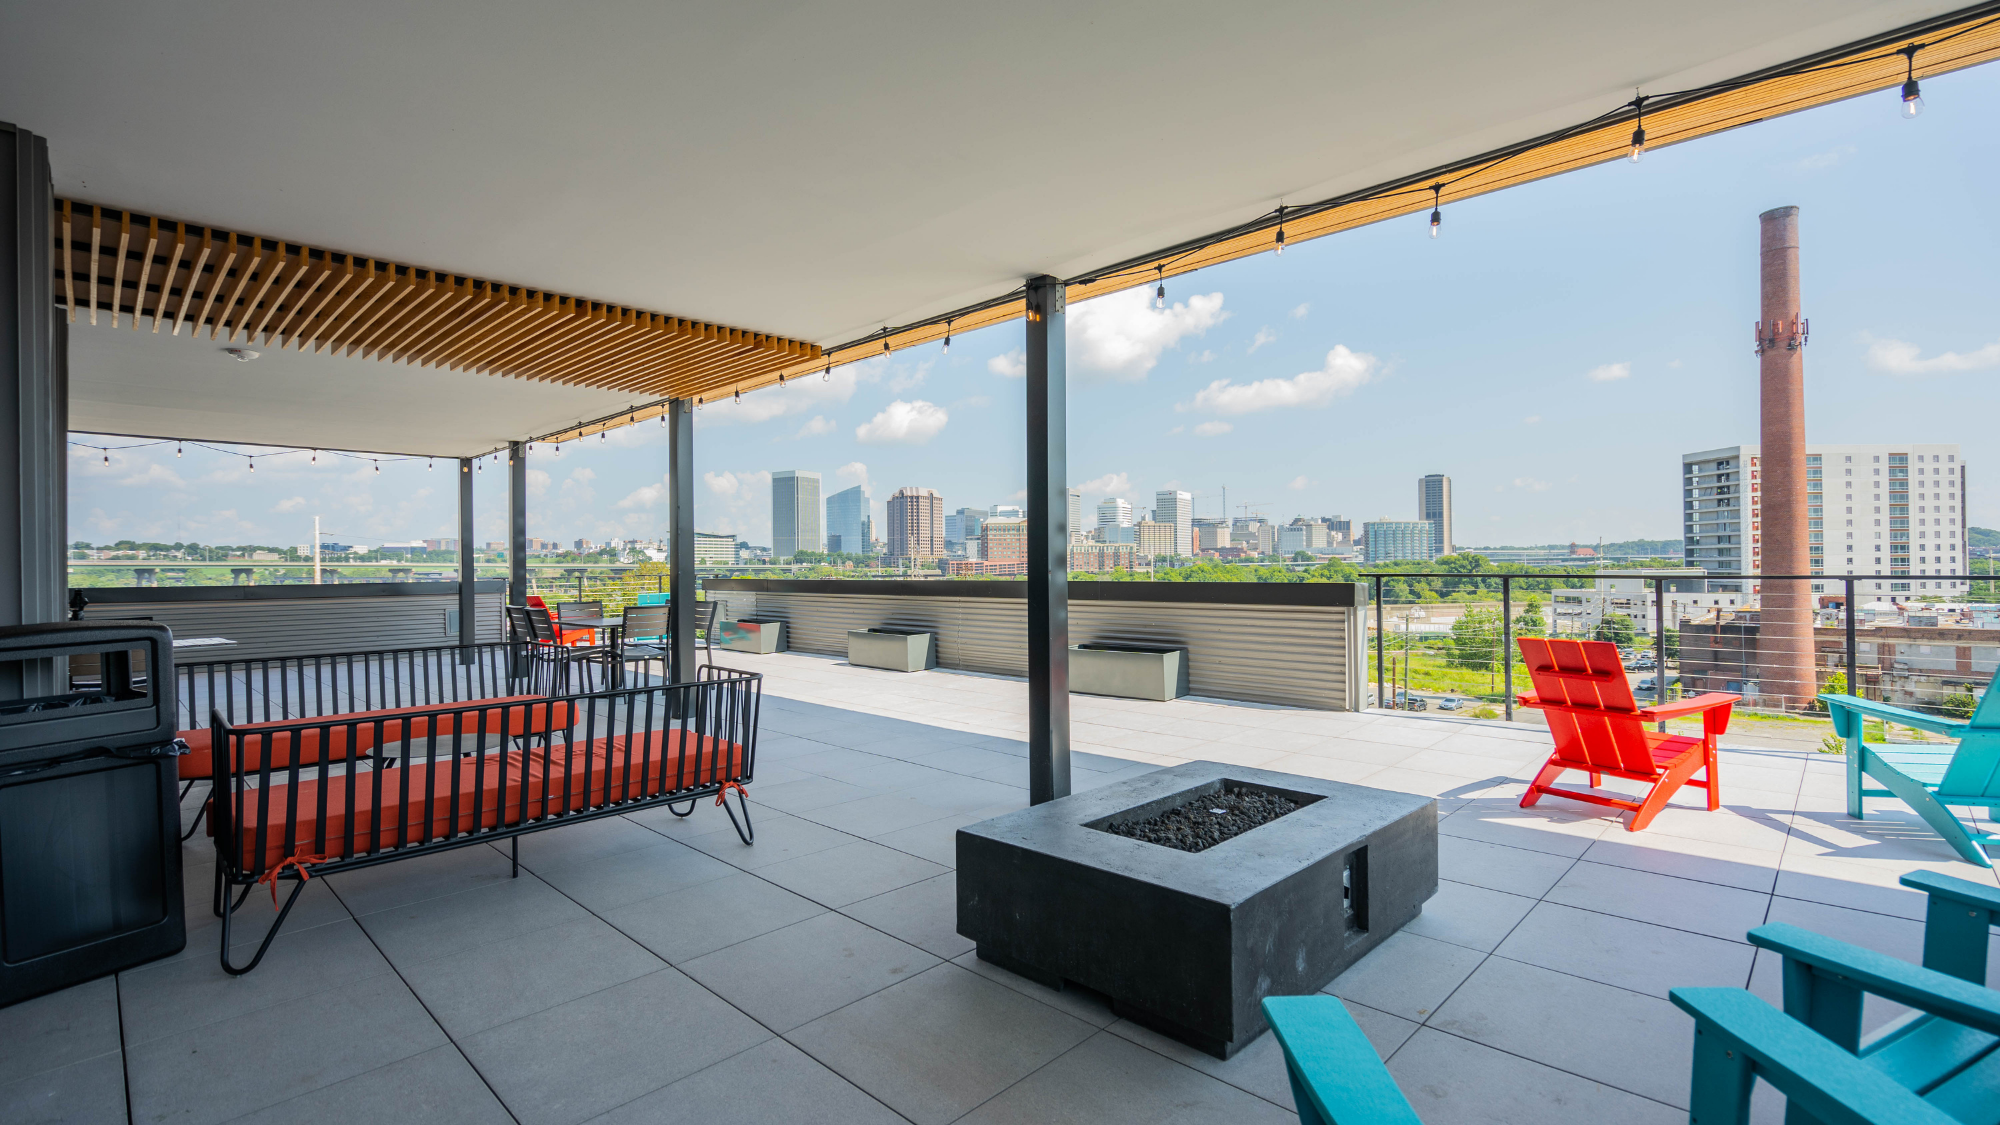 Make Time For The Great Outdoors - Overlook at City View Richmond, VA